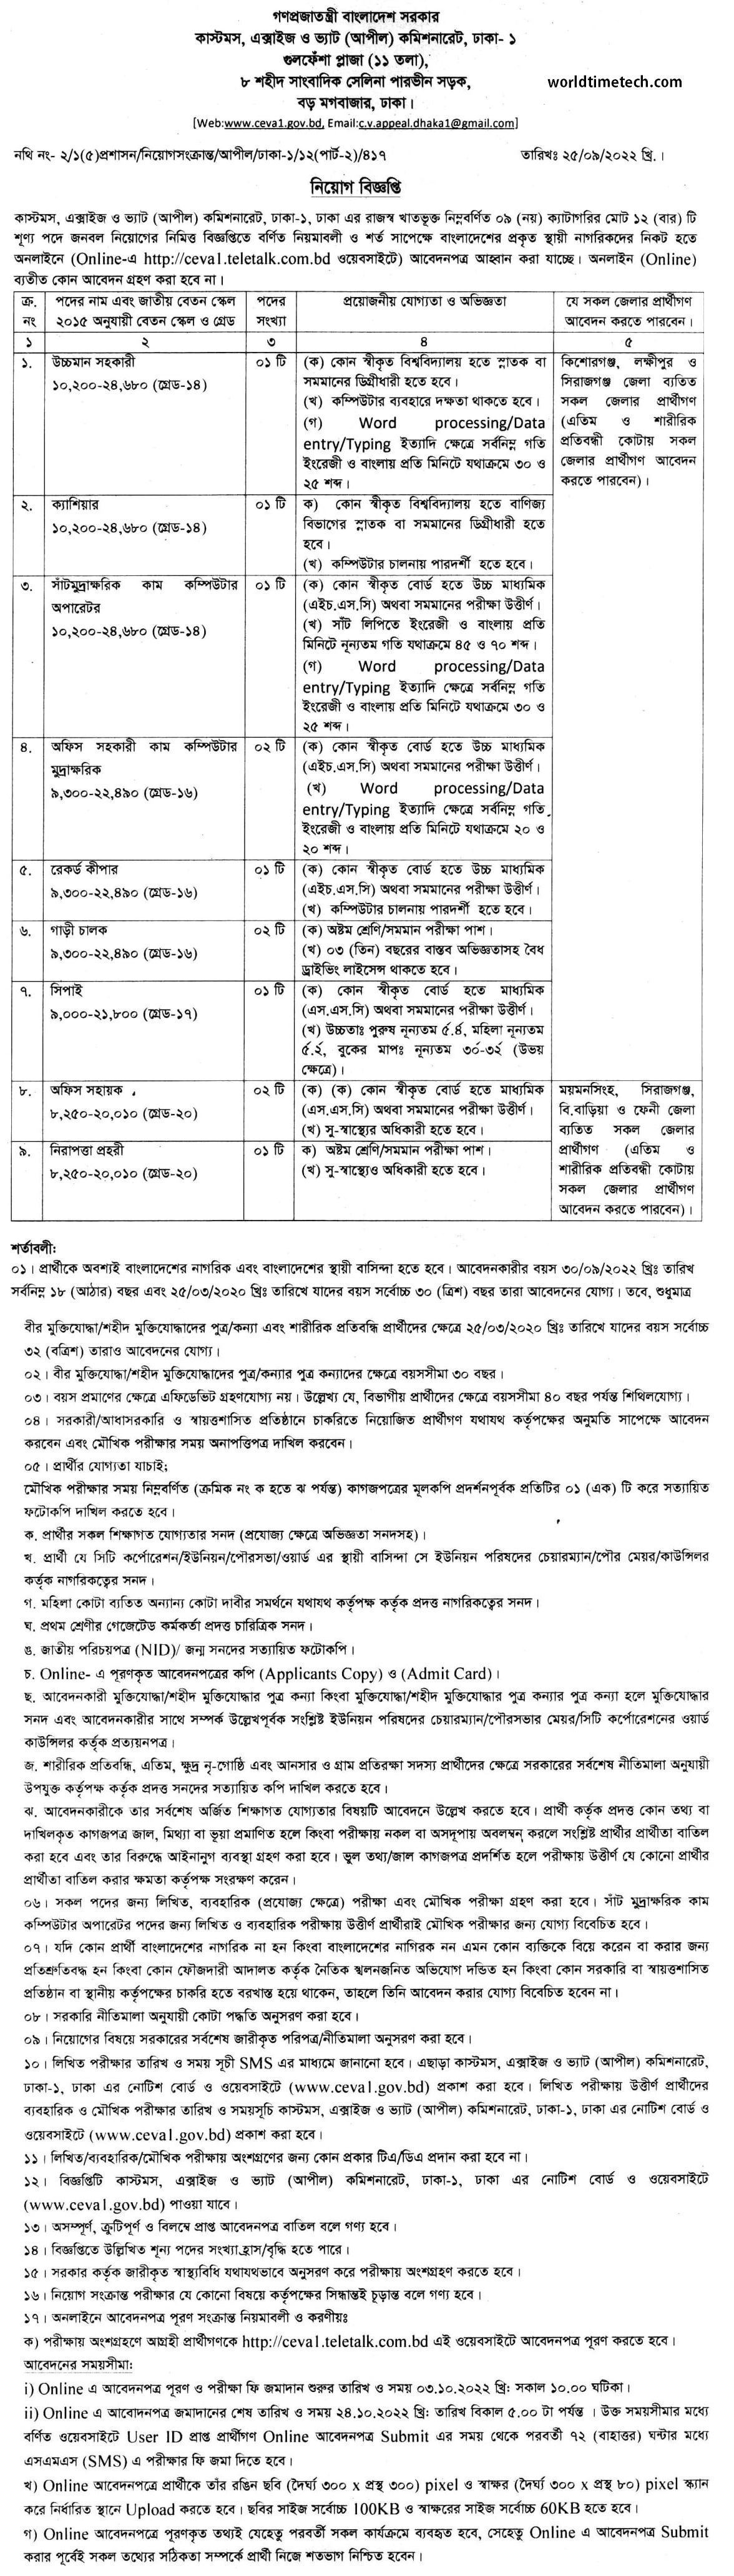 govt-customs-excise-and-vat-appeals-commissionerate-dhaka-job-circular-2022